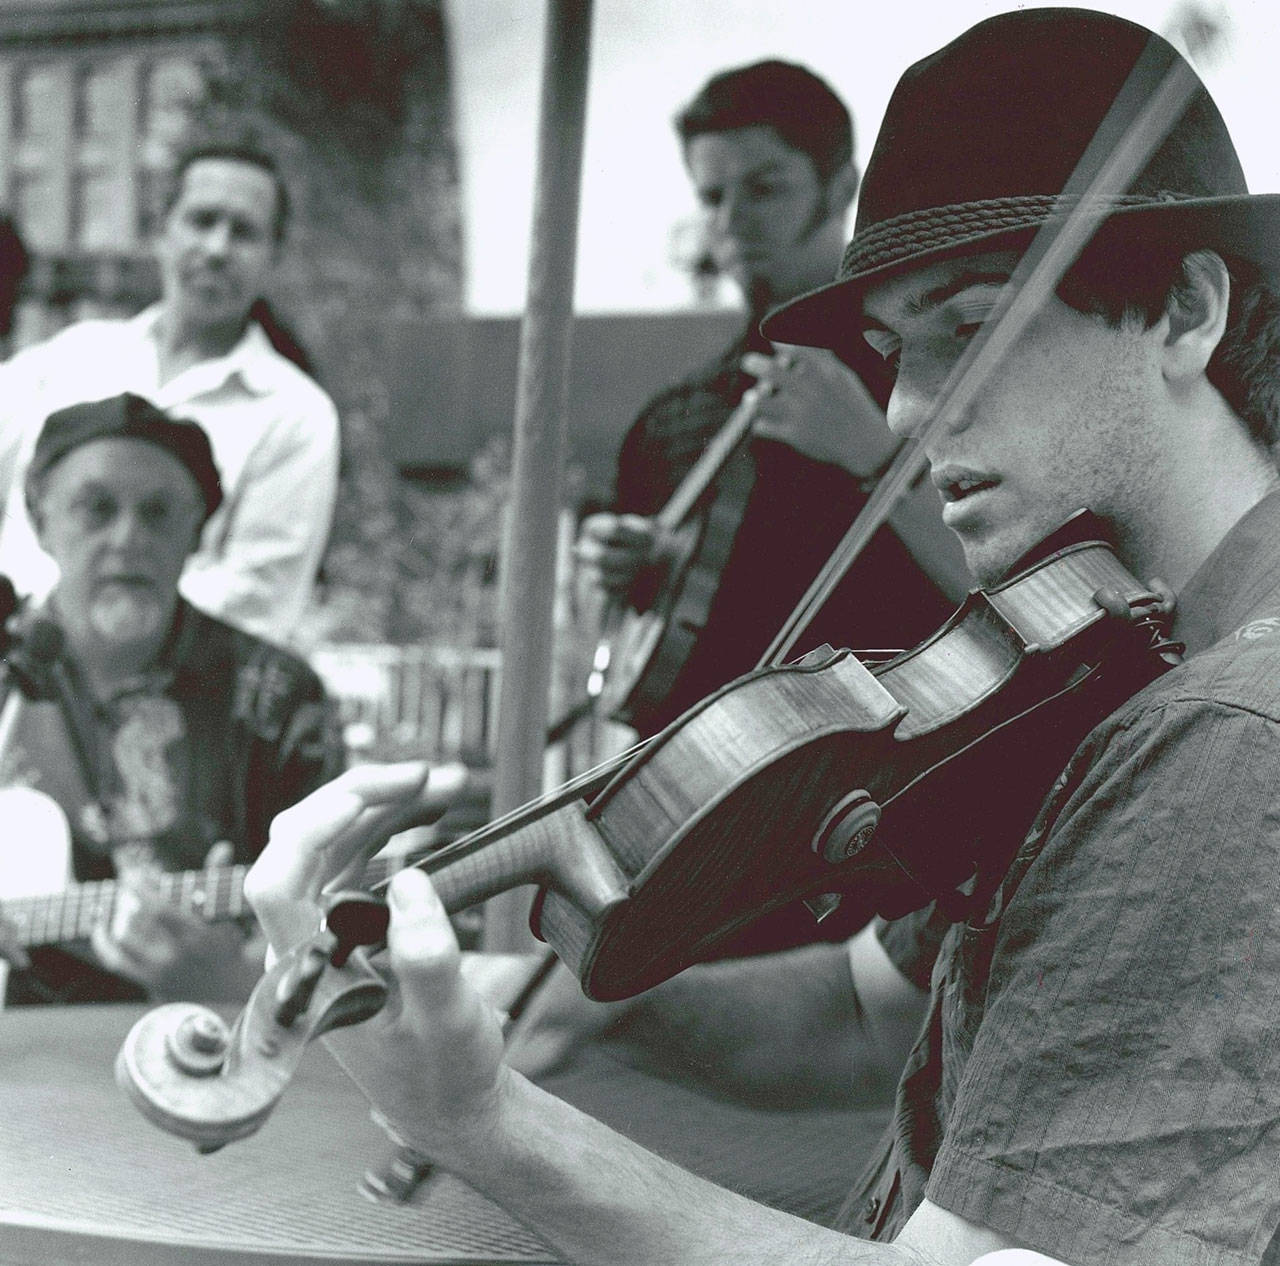 Ranger and the ‘Re-Arrangers’ to perform at free gypsy jazz concert